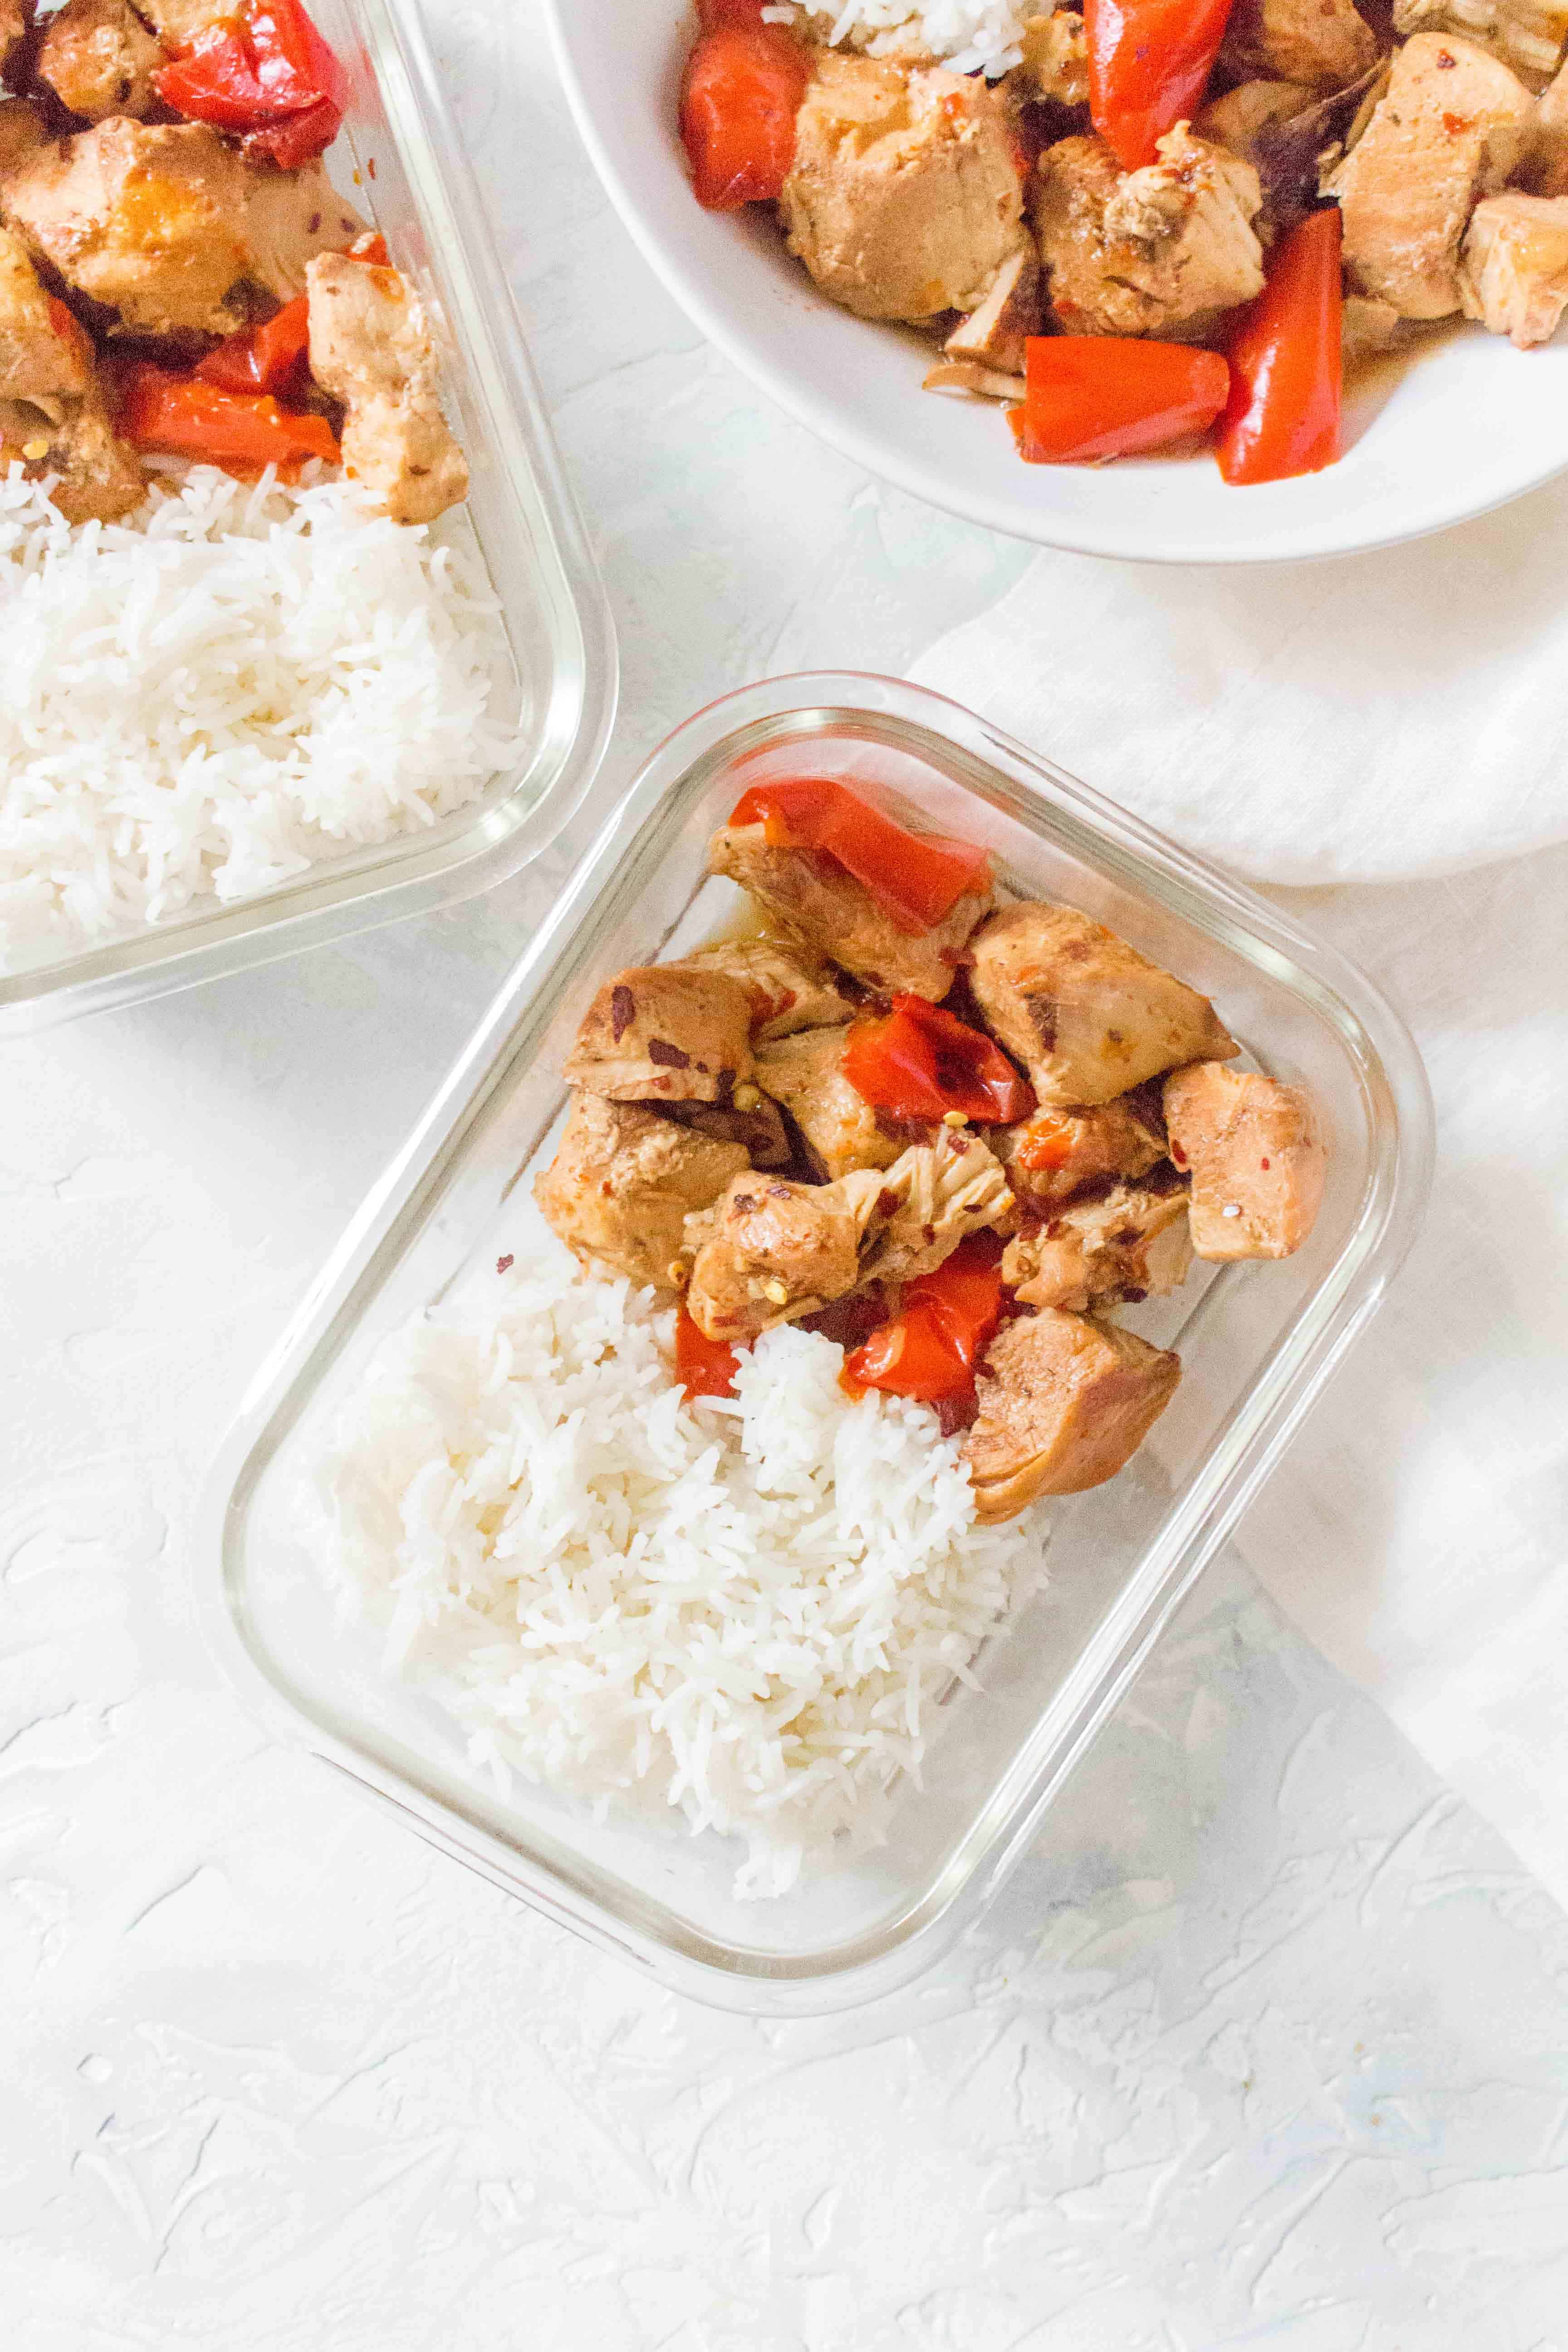 This Instant Pot Kung Pao Chicken with Rice recipe is the perfect combination of sweet, salty, and spicy! The rice is made pot in pot so everything cooks together.